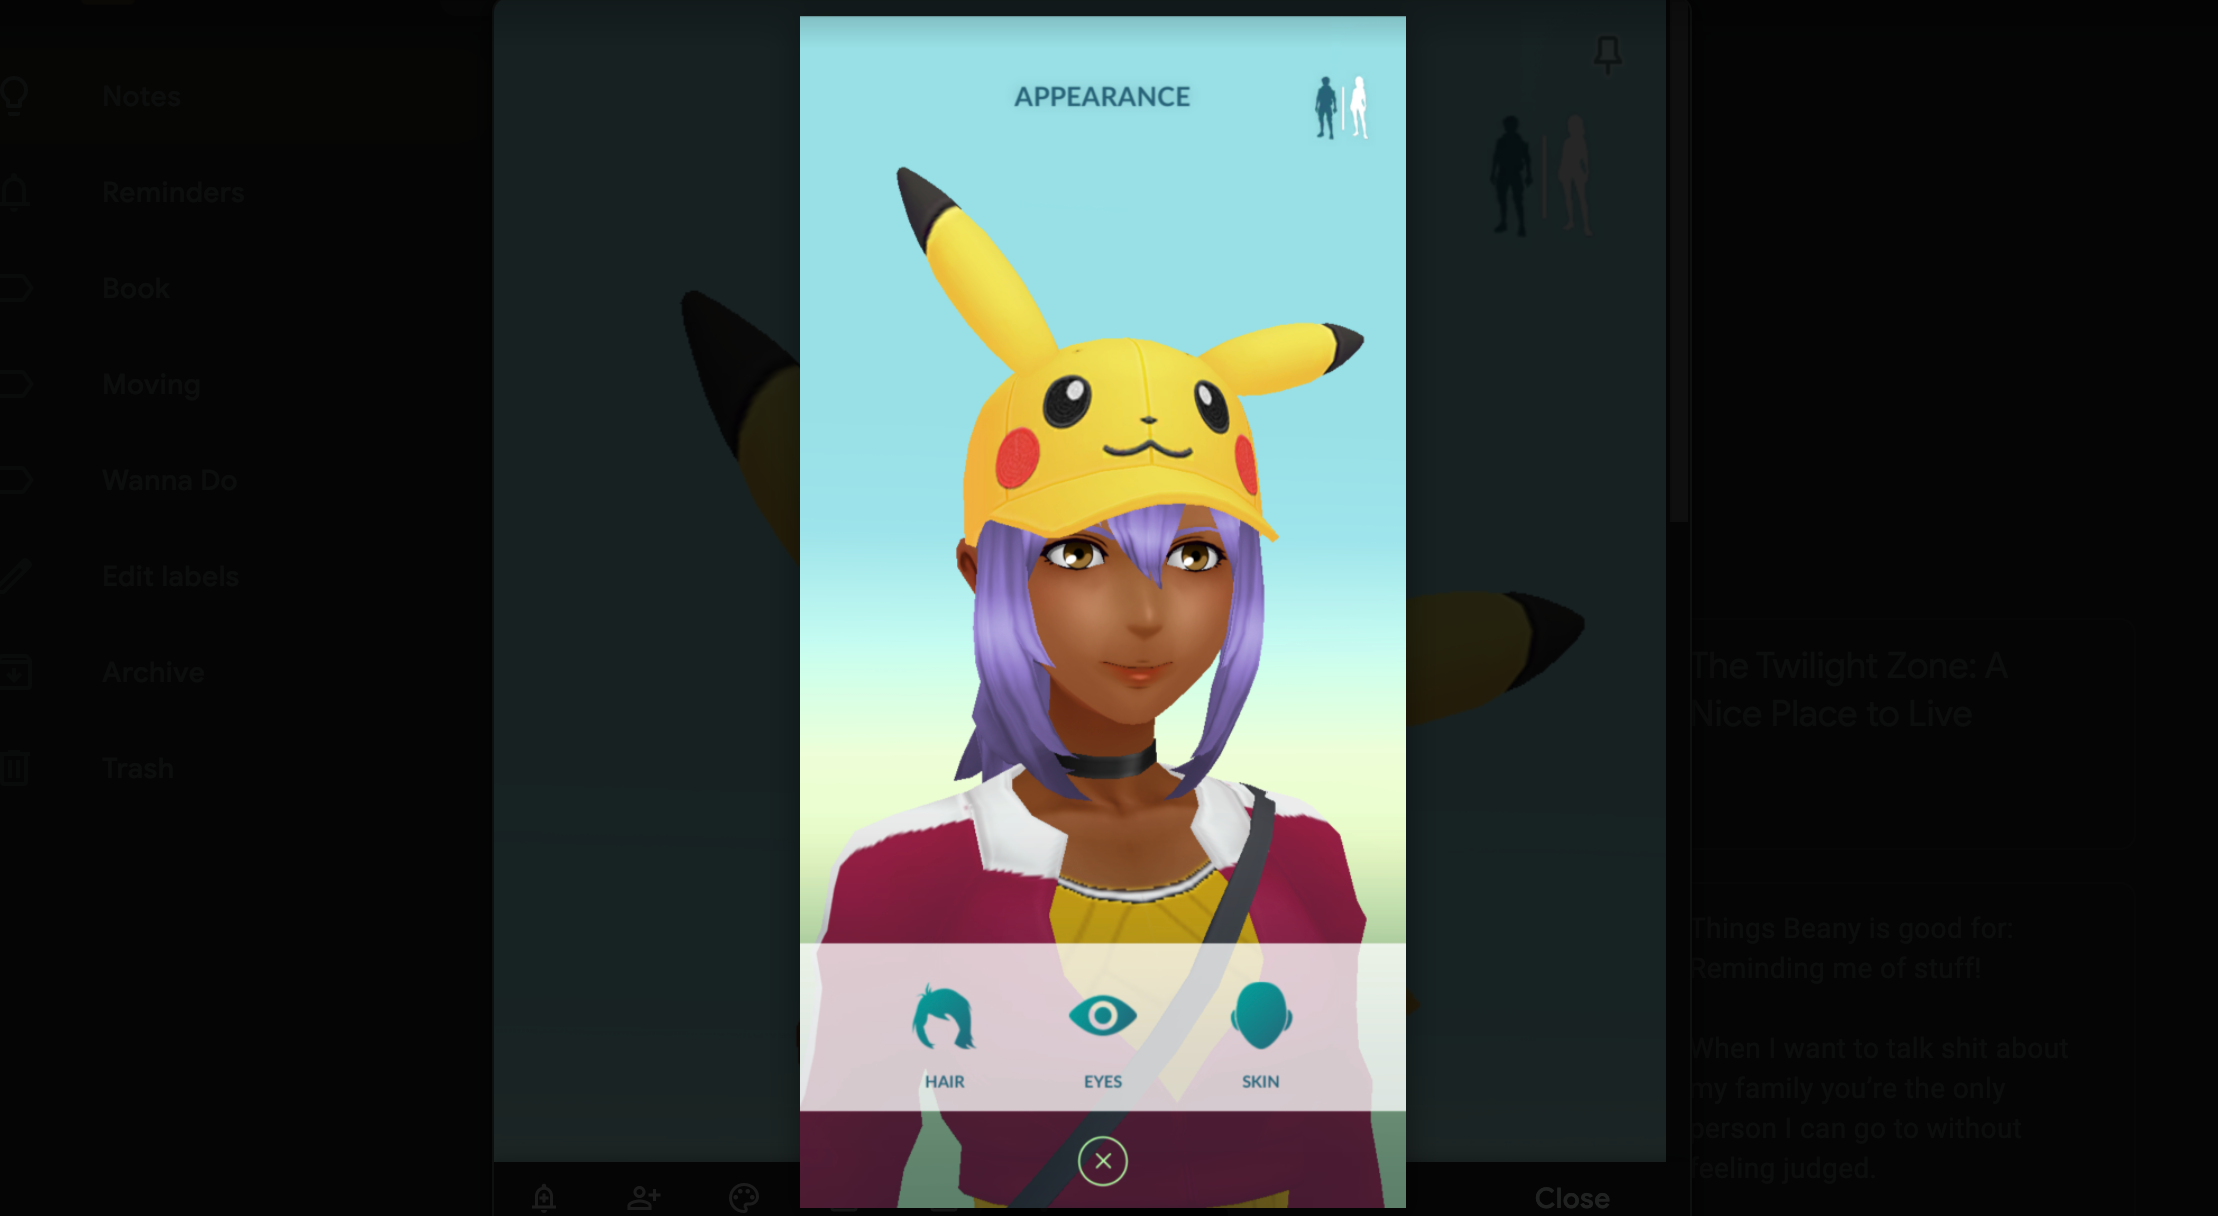 How Do You Change the Hairstyles in 'Pokémon Go'?